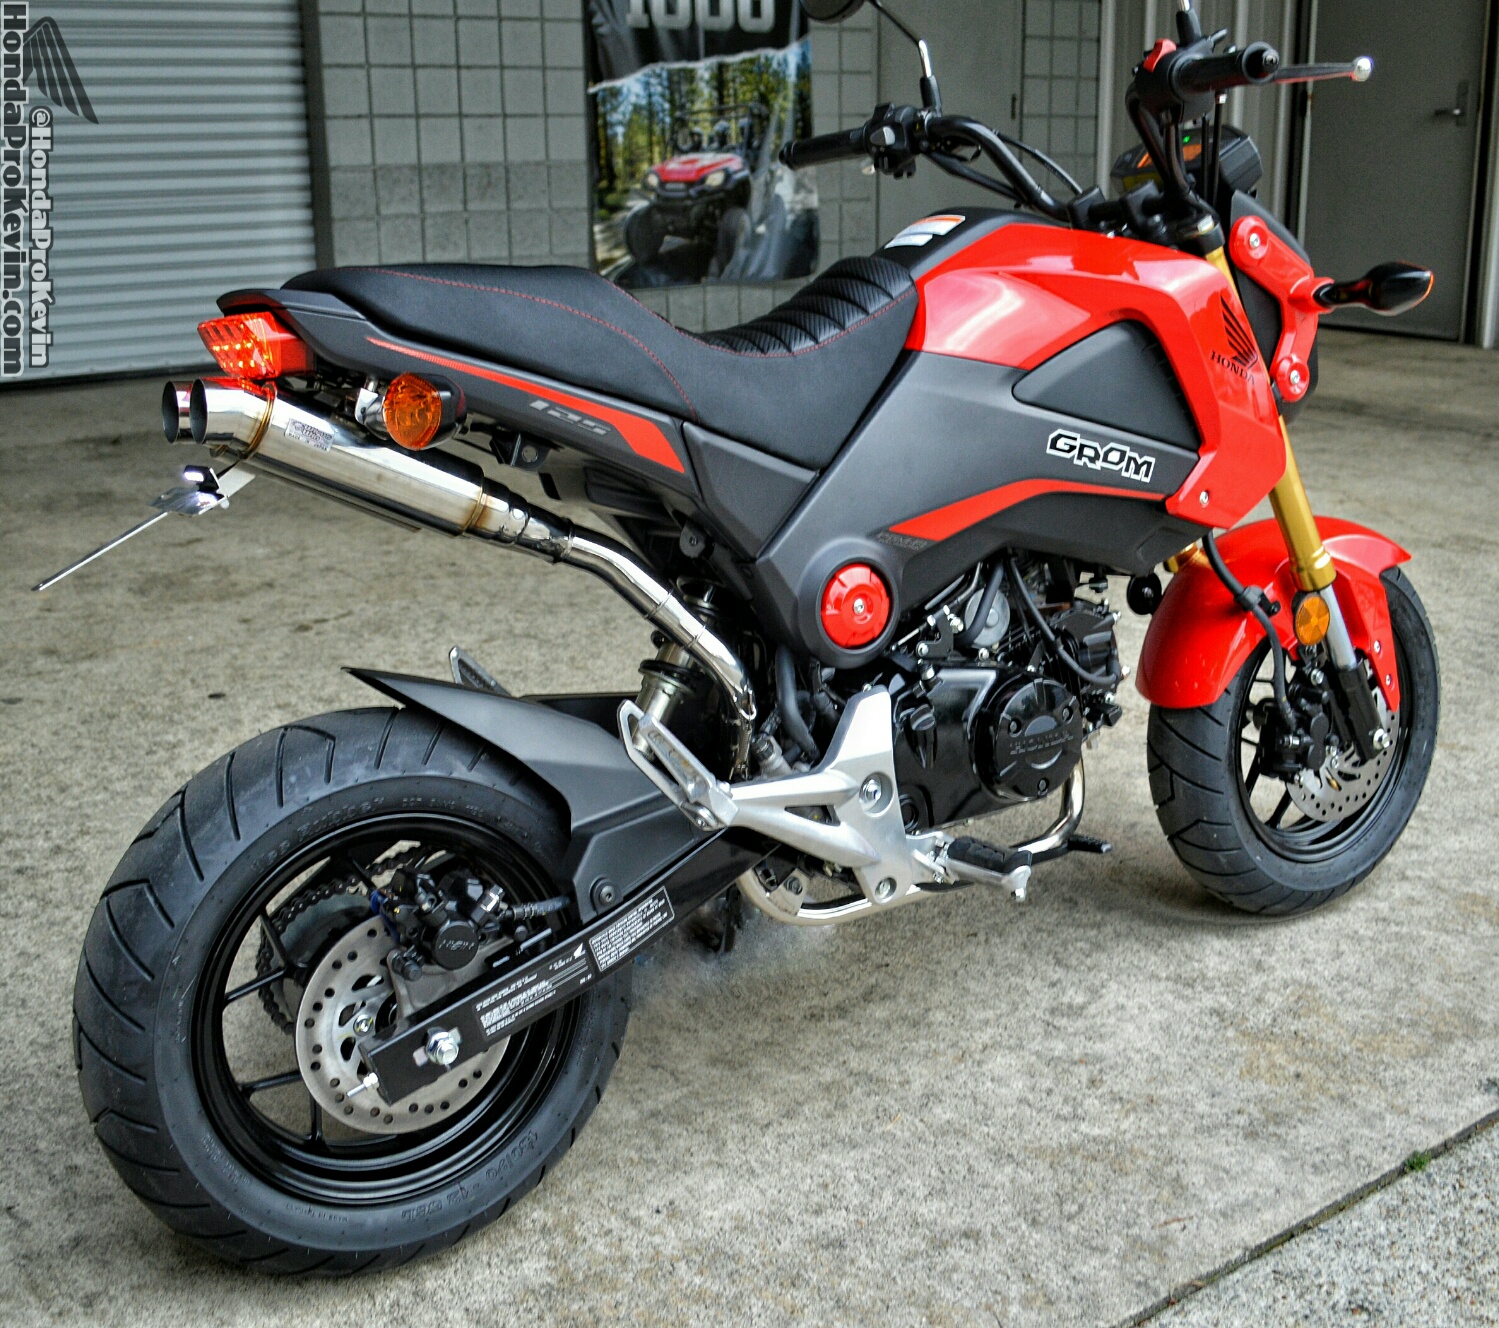 Honda Grom / MSX Dual Exhaust Review - WirusWin Twin Full System